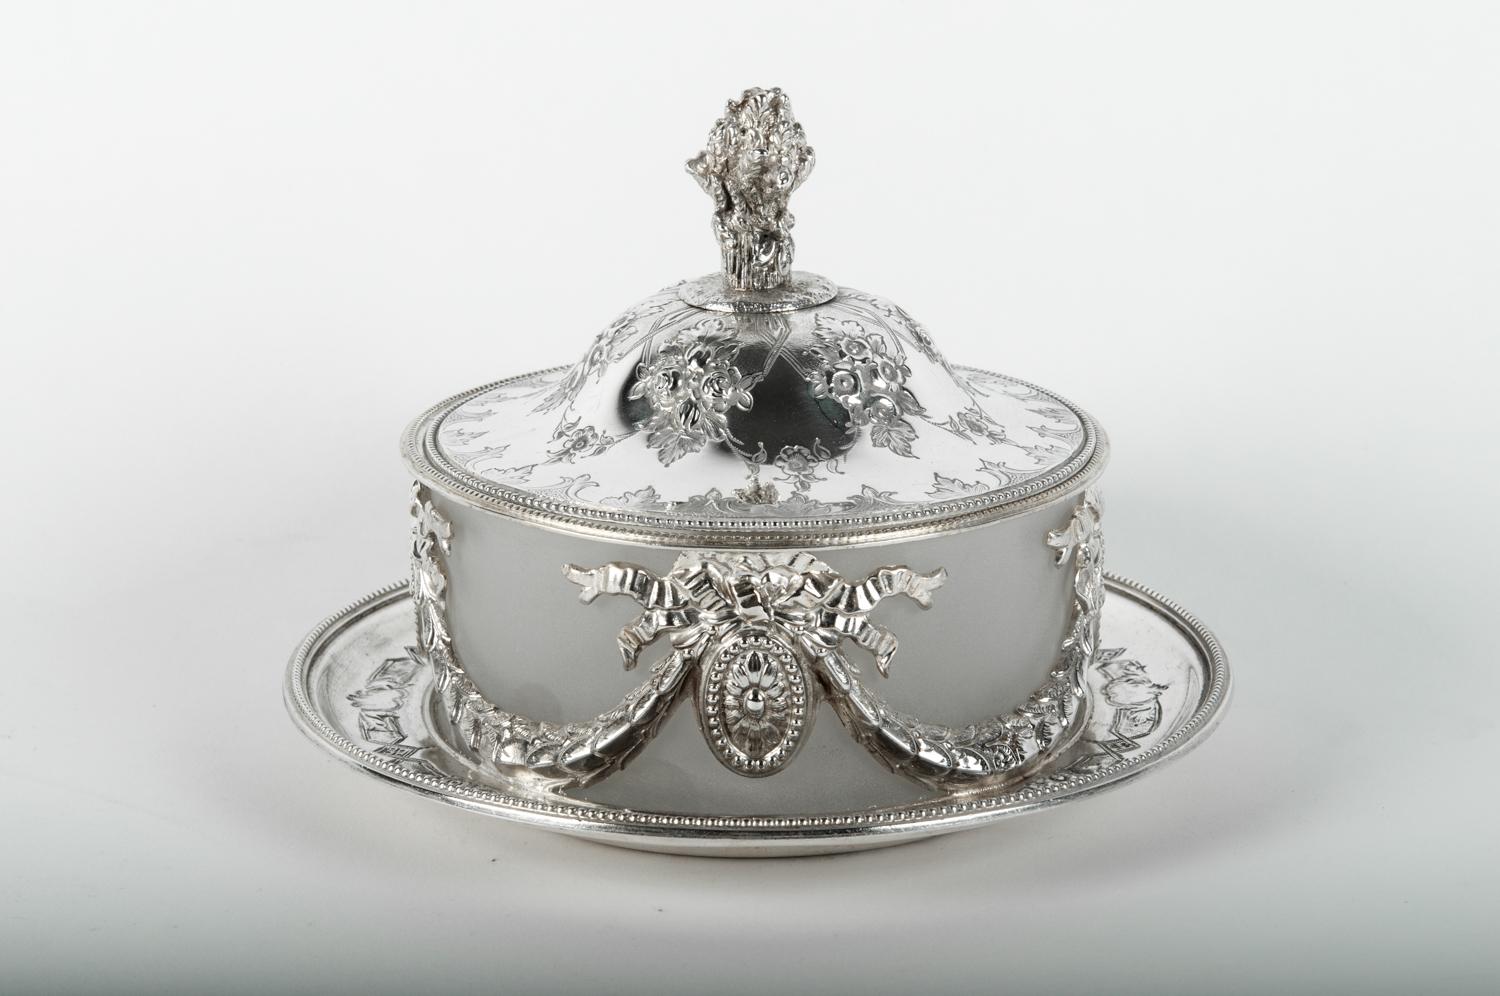 Old English Sheffield silver plated tableware dish with frosted holding glass insert & exterior design details. The piece is in great condition, minor wear. The dish stands about 6 inches high x 8 inches diameter.